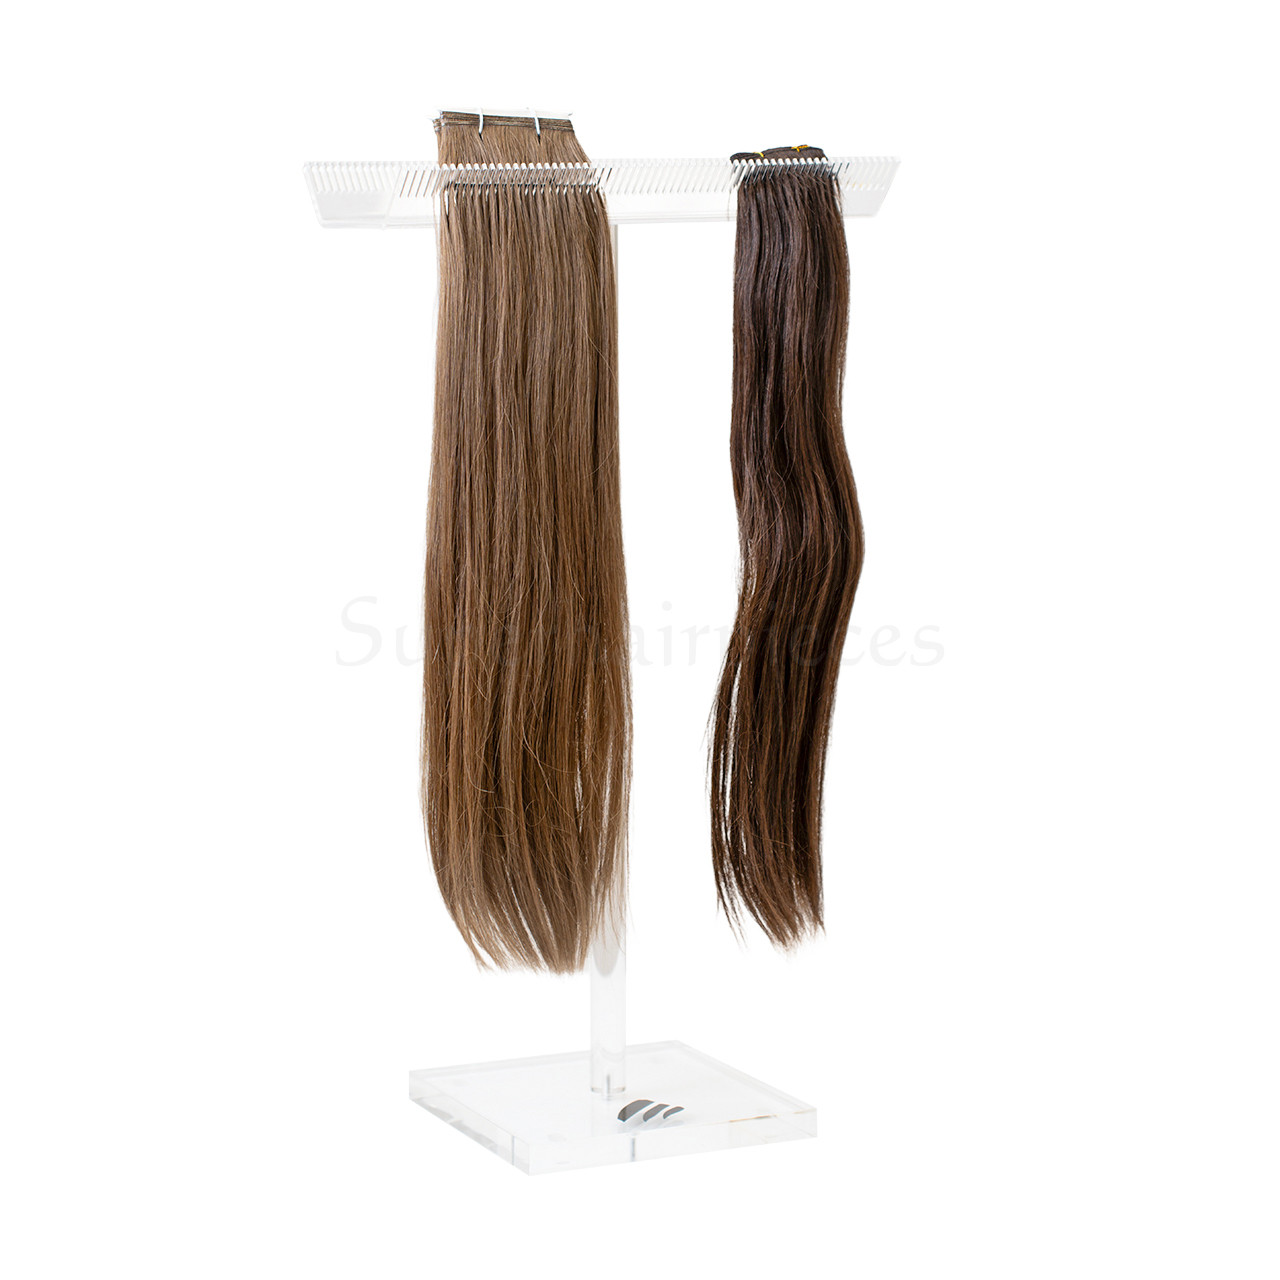 Hair Extensions Rack Human Hair Extension Tool Works for Clip-ins